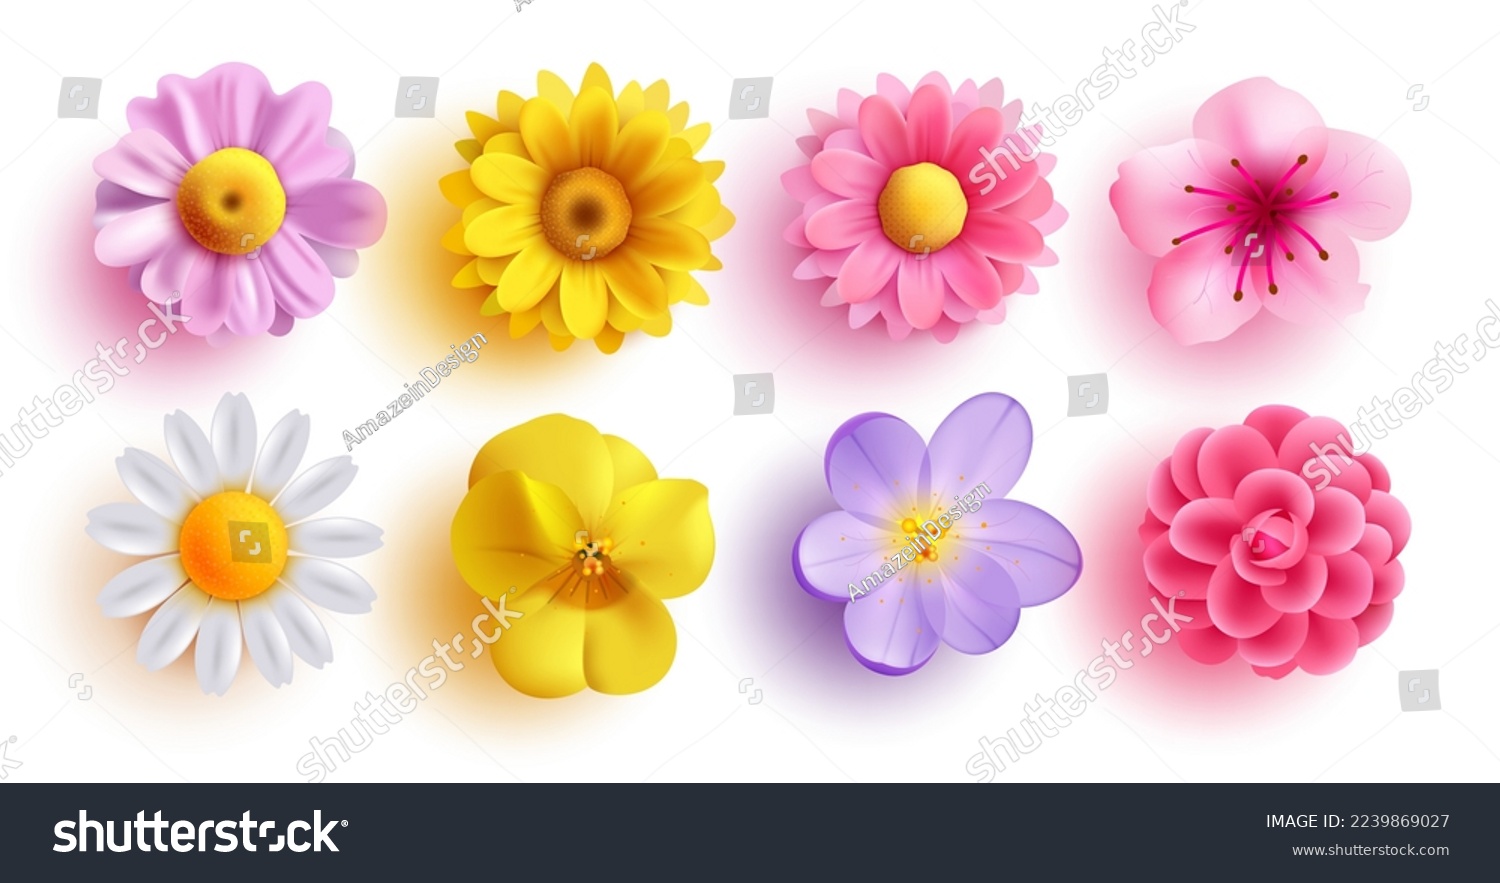 Spring flowers set vector design. Spring flower collection like daffodil, sun flower, crocus, daisy, peony and chrysanthemum fresh and blooming elements isolated in white background. Vector  #2239869027